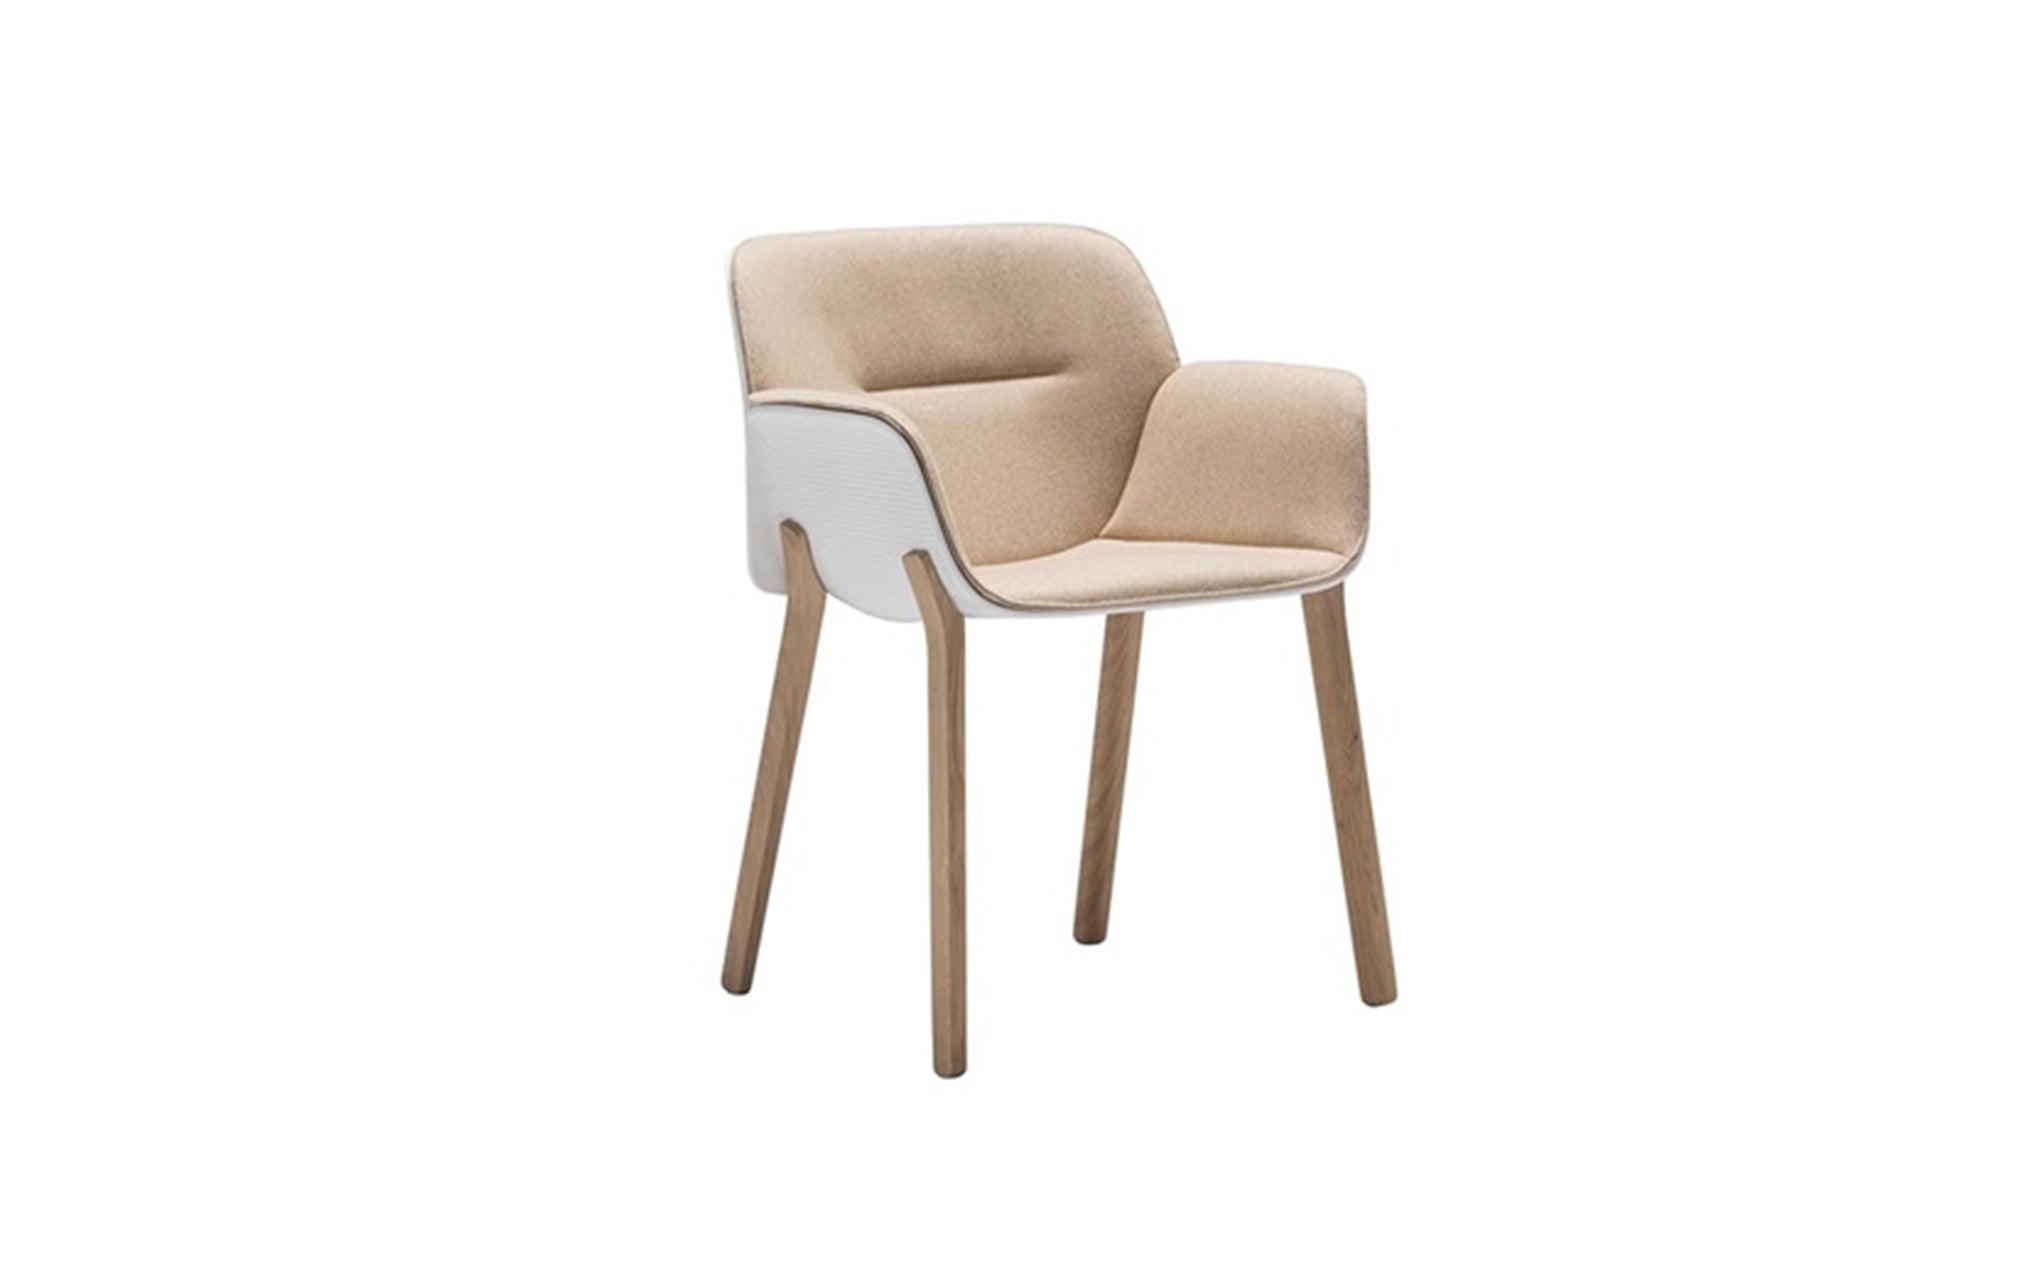 The Sustainable Andreu World Armchair by Patricia Urquiola